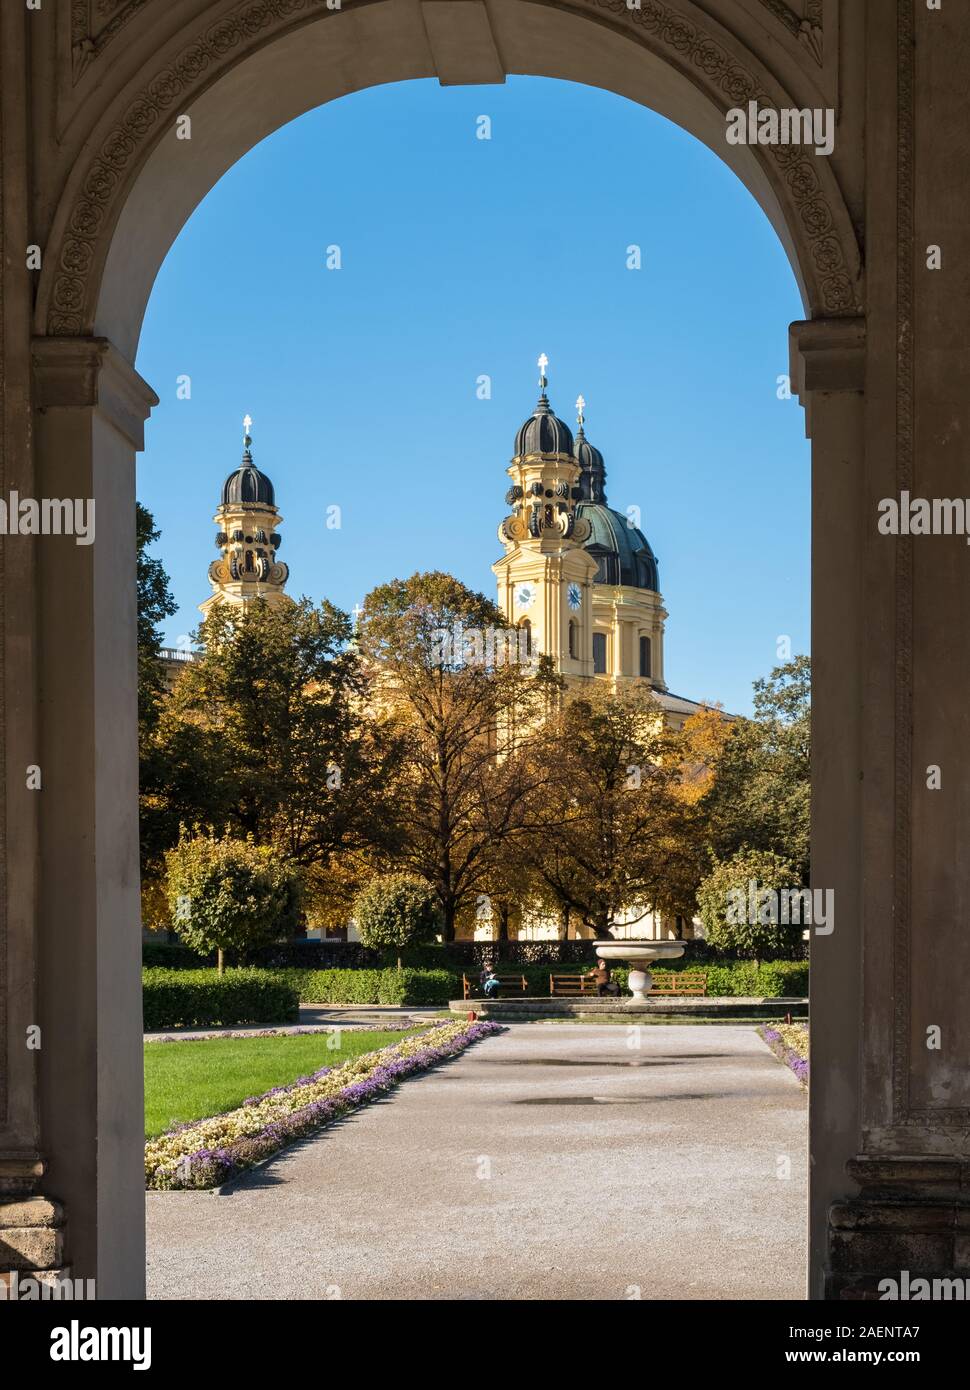 Landmark domed towers of Theatine Church viewed from Residenz gardens, Munich, Germany Stock Photo